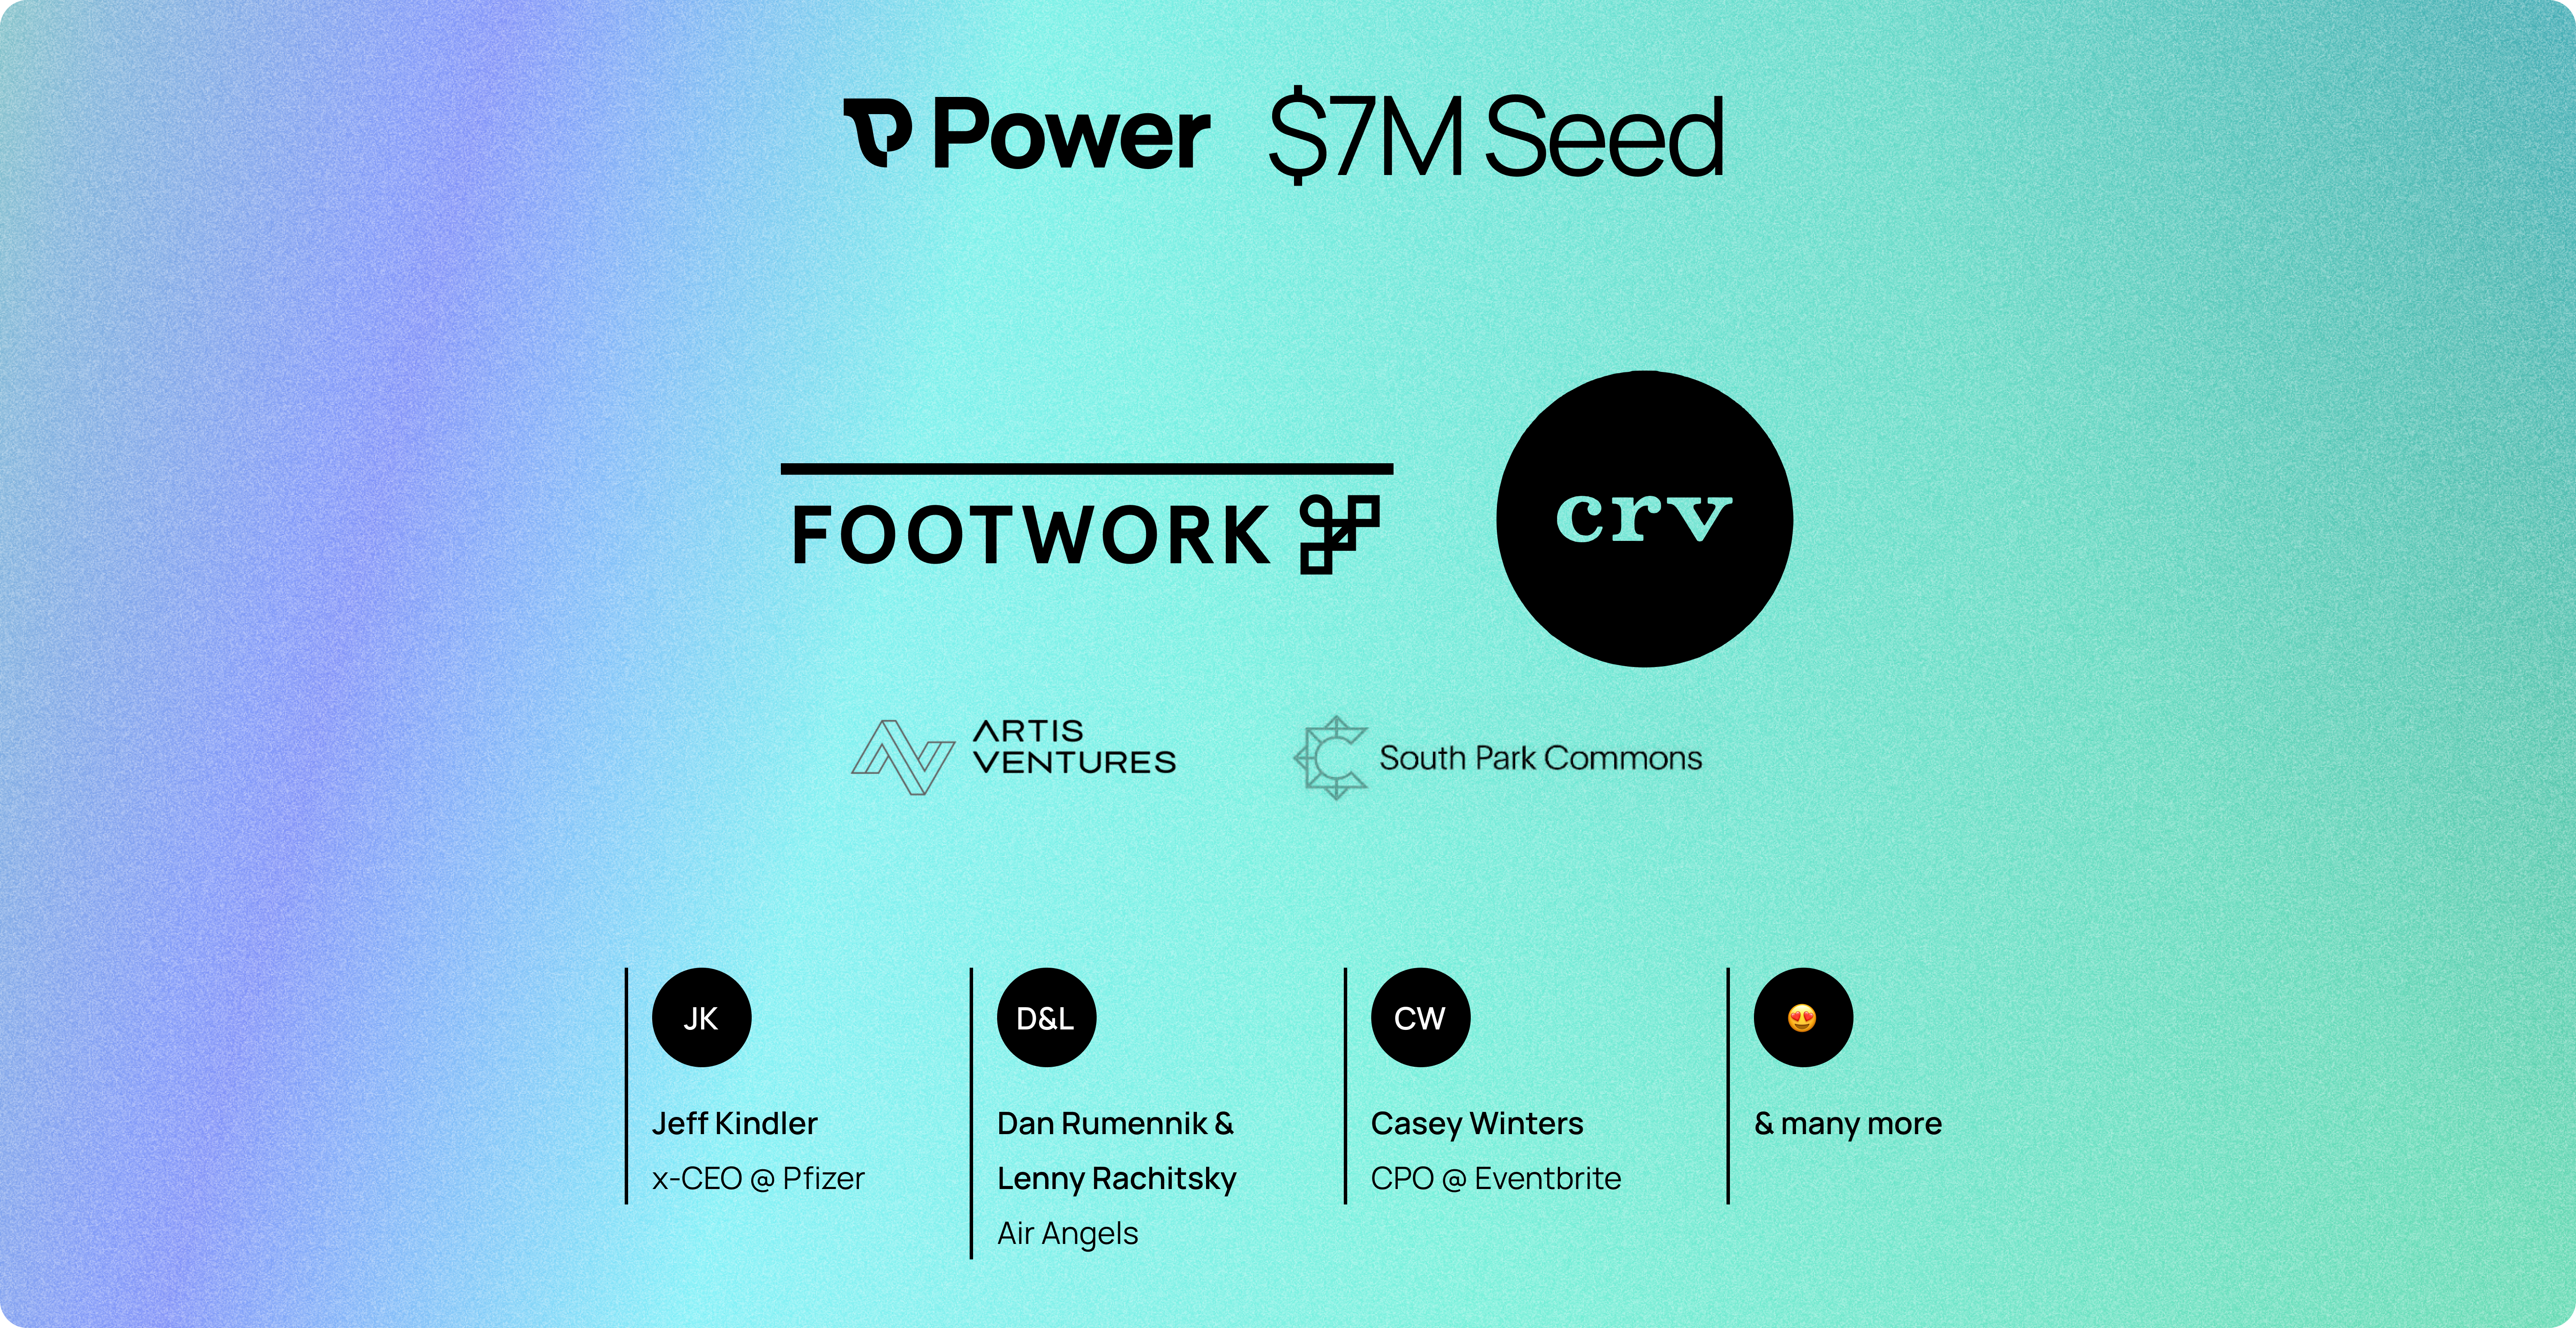 Power seed round information and investors